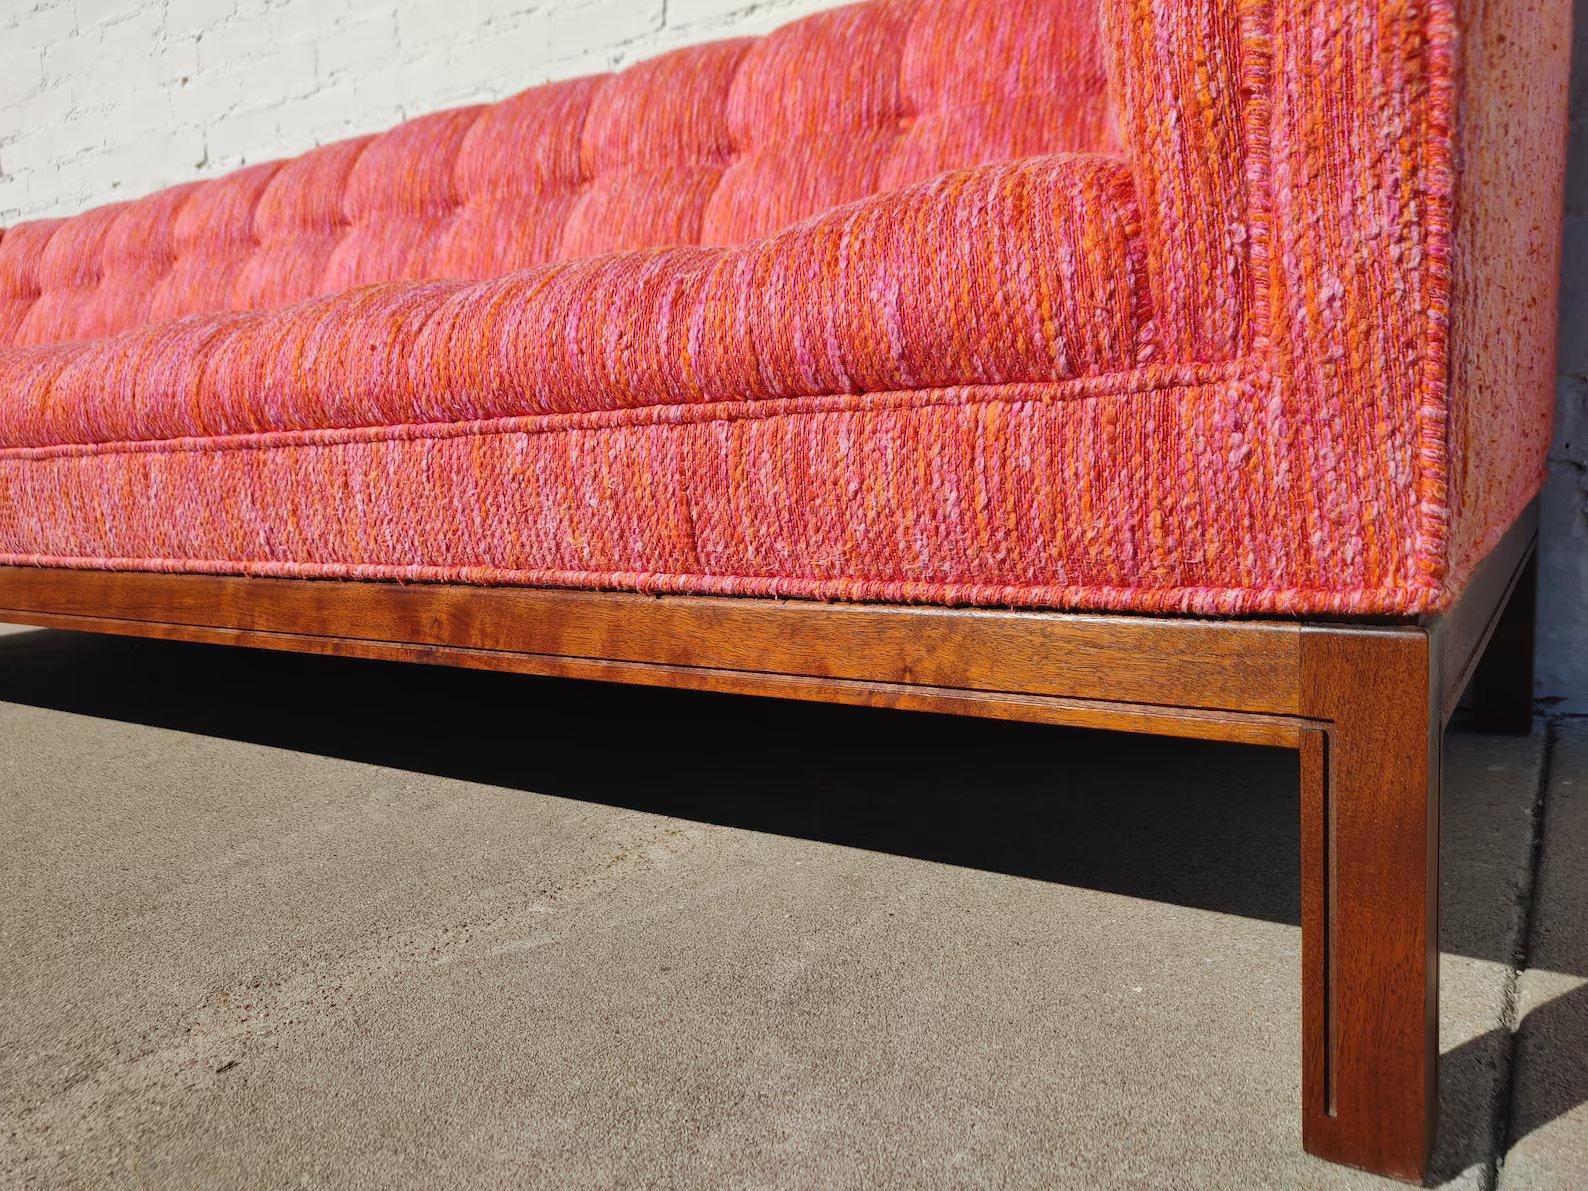 Mid Century Modern Walnut Base Tufted Sofa

Above average vintage condition and structurally sound. Upholstery in very good vintage condition. Very little wear, no tears, very little soiling. Walnut base has very little wear. Outdoor listing